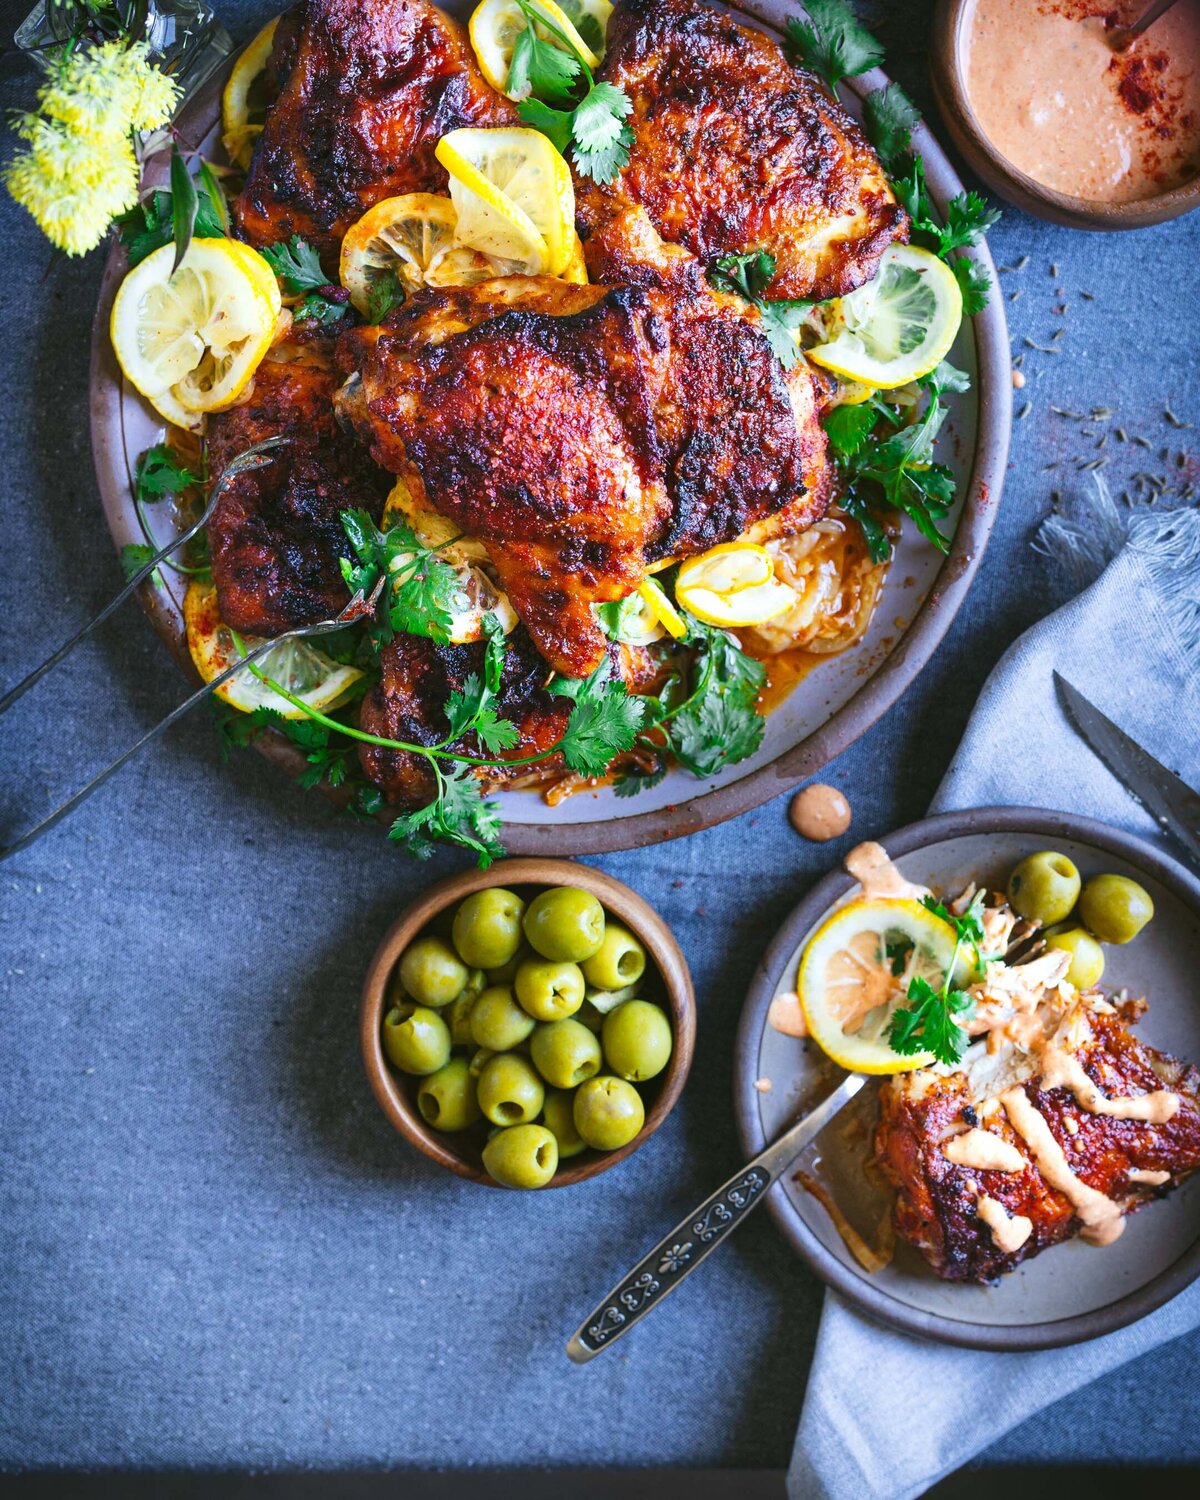 Harissa Chicken served with lemon, olives, cilantro and a spicy aioli